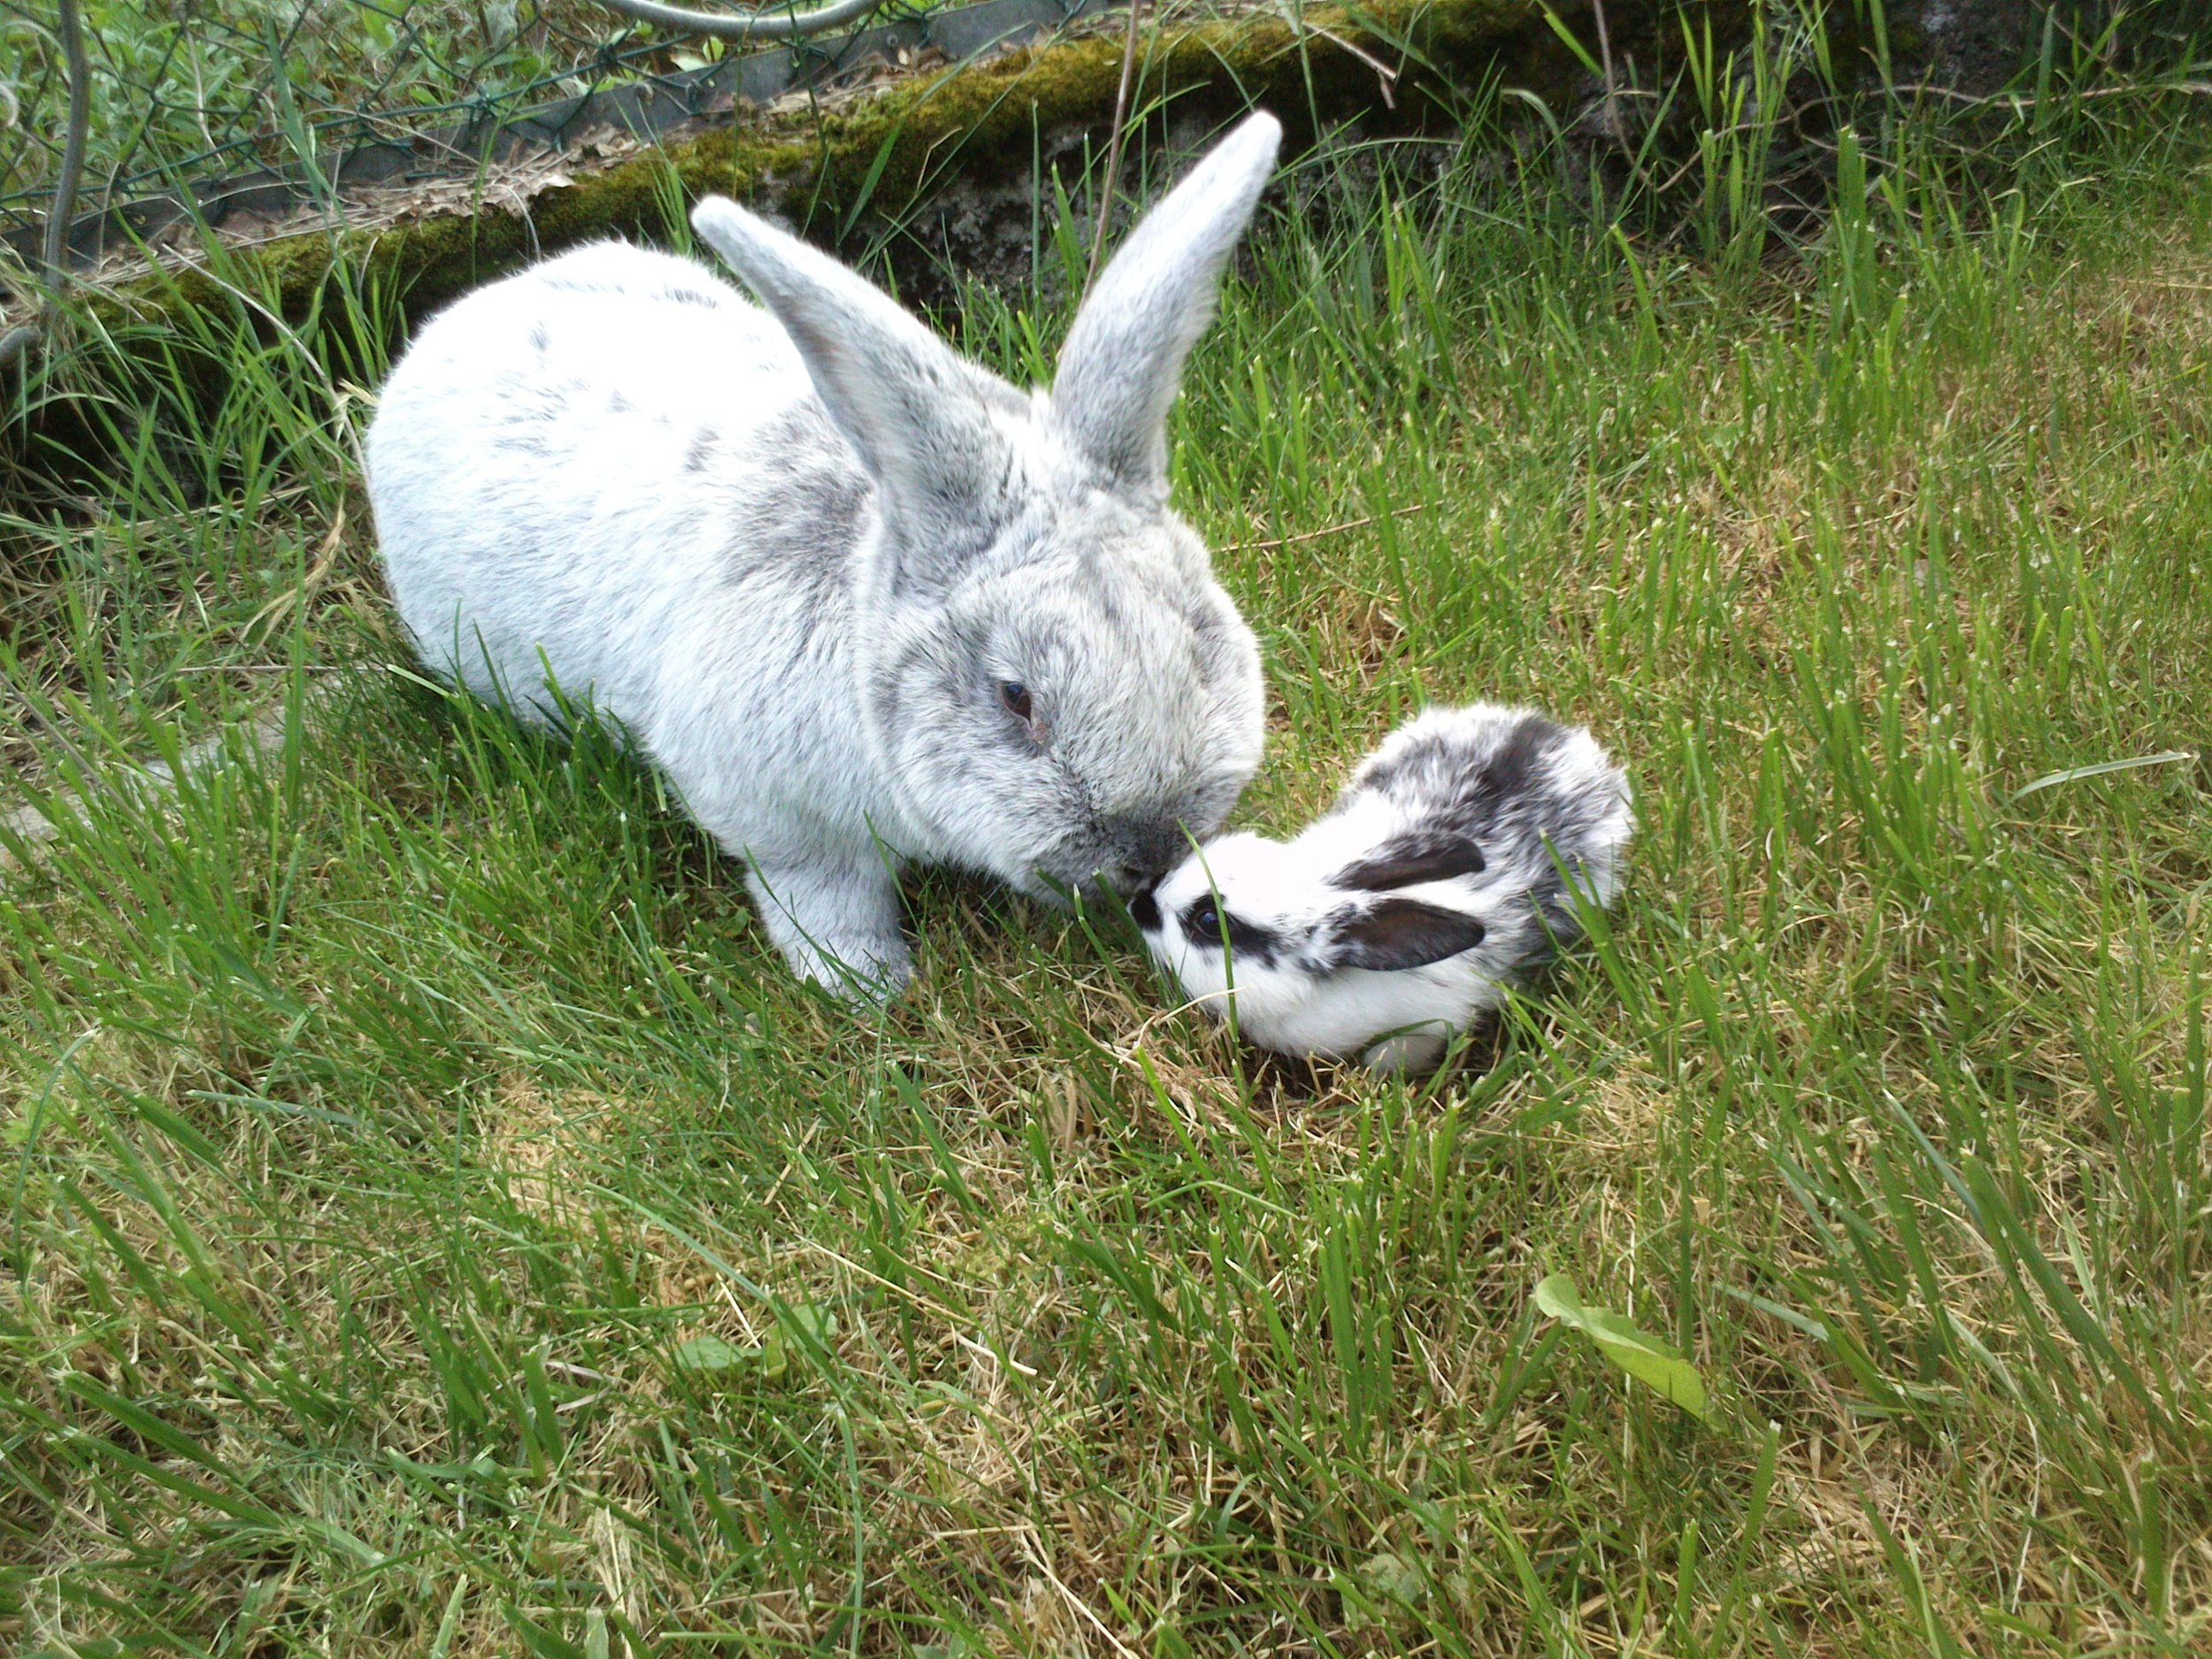 Big Bunny and Tiny Bunny Are Curious About Each Other